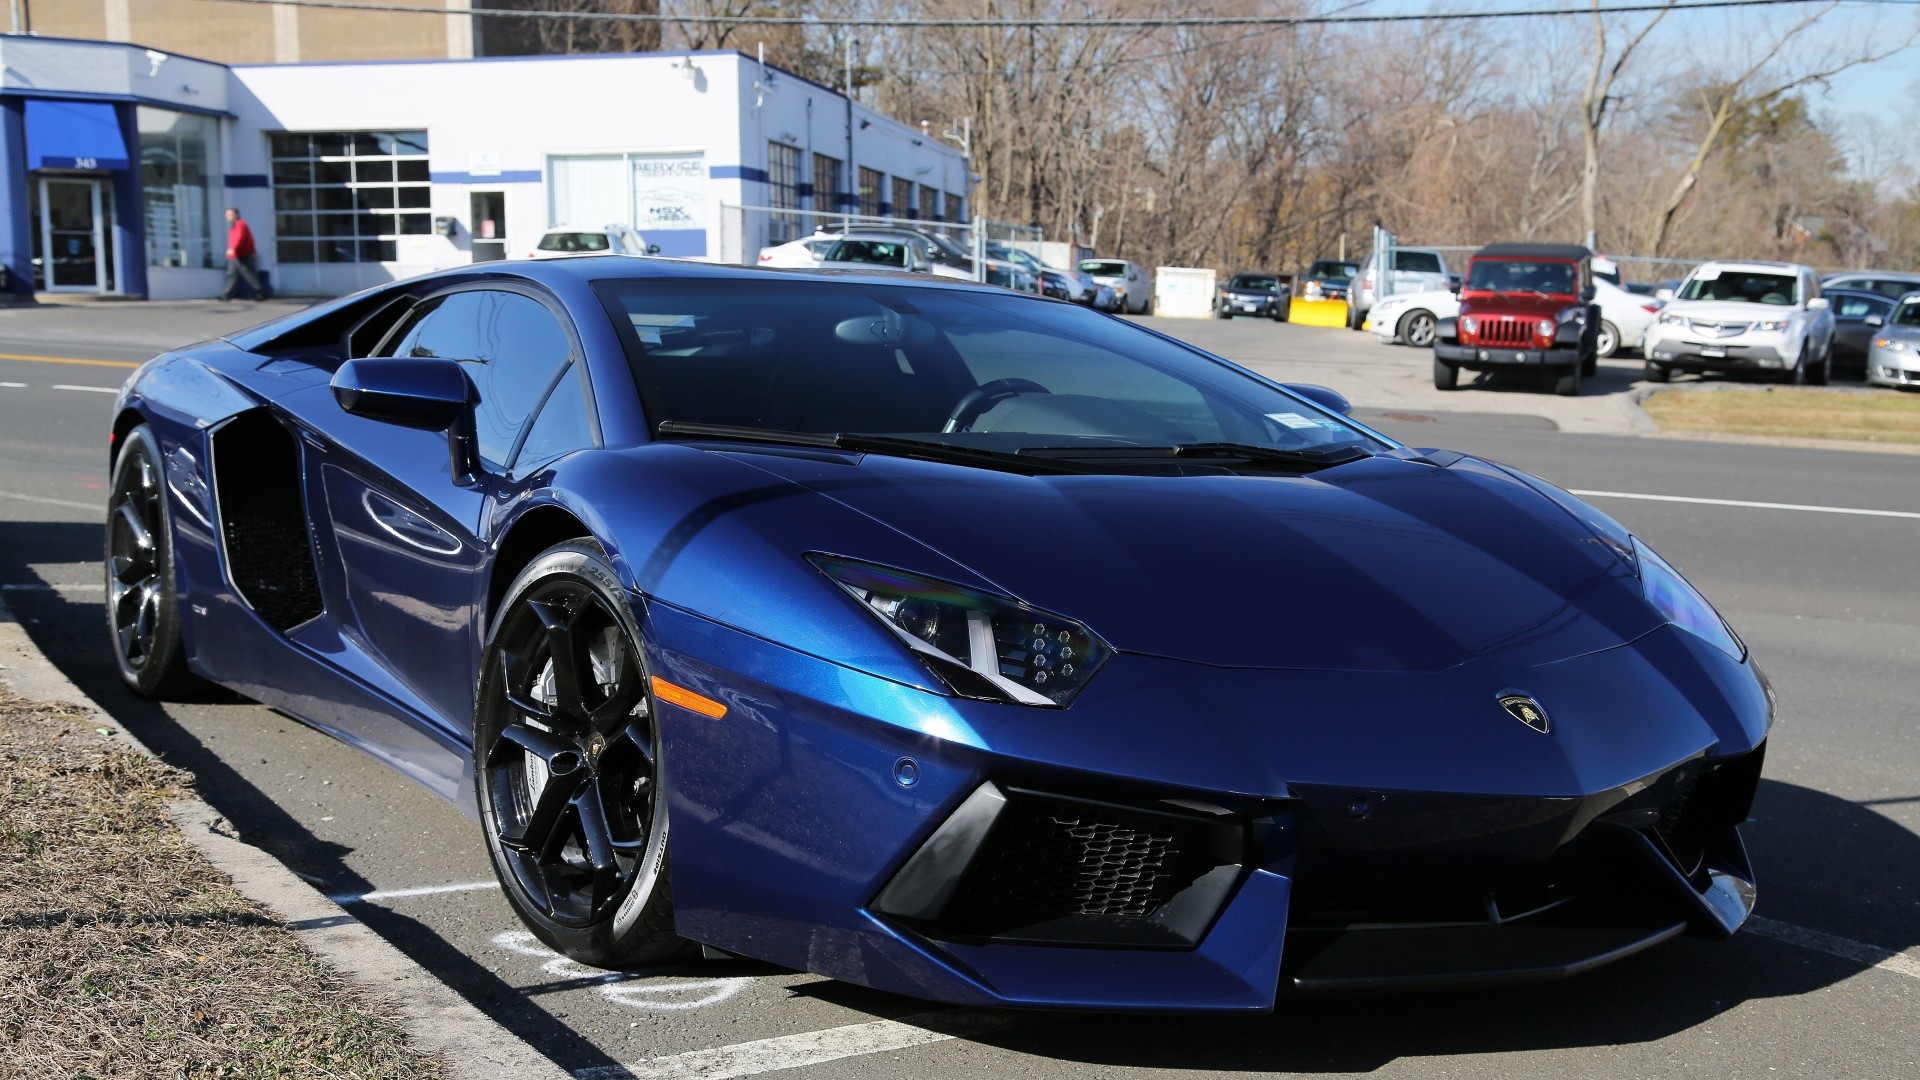 1920x1080 This Lamborghini Aventador, Blue, Lamborghini always drives as fast as you  want. Give us your comment below.